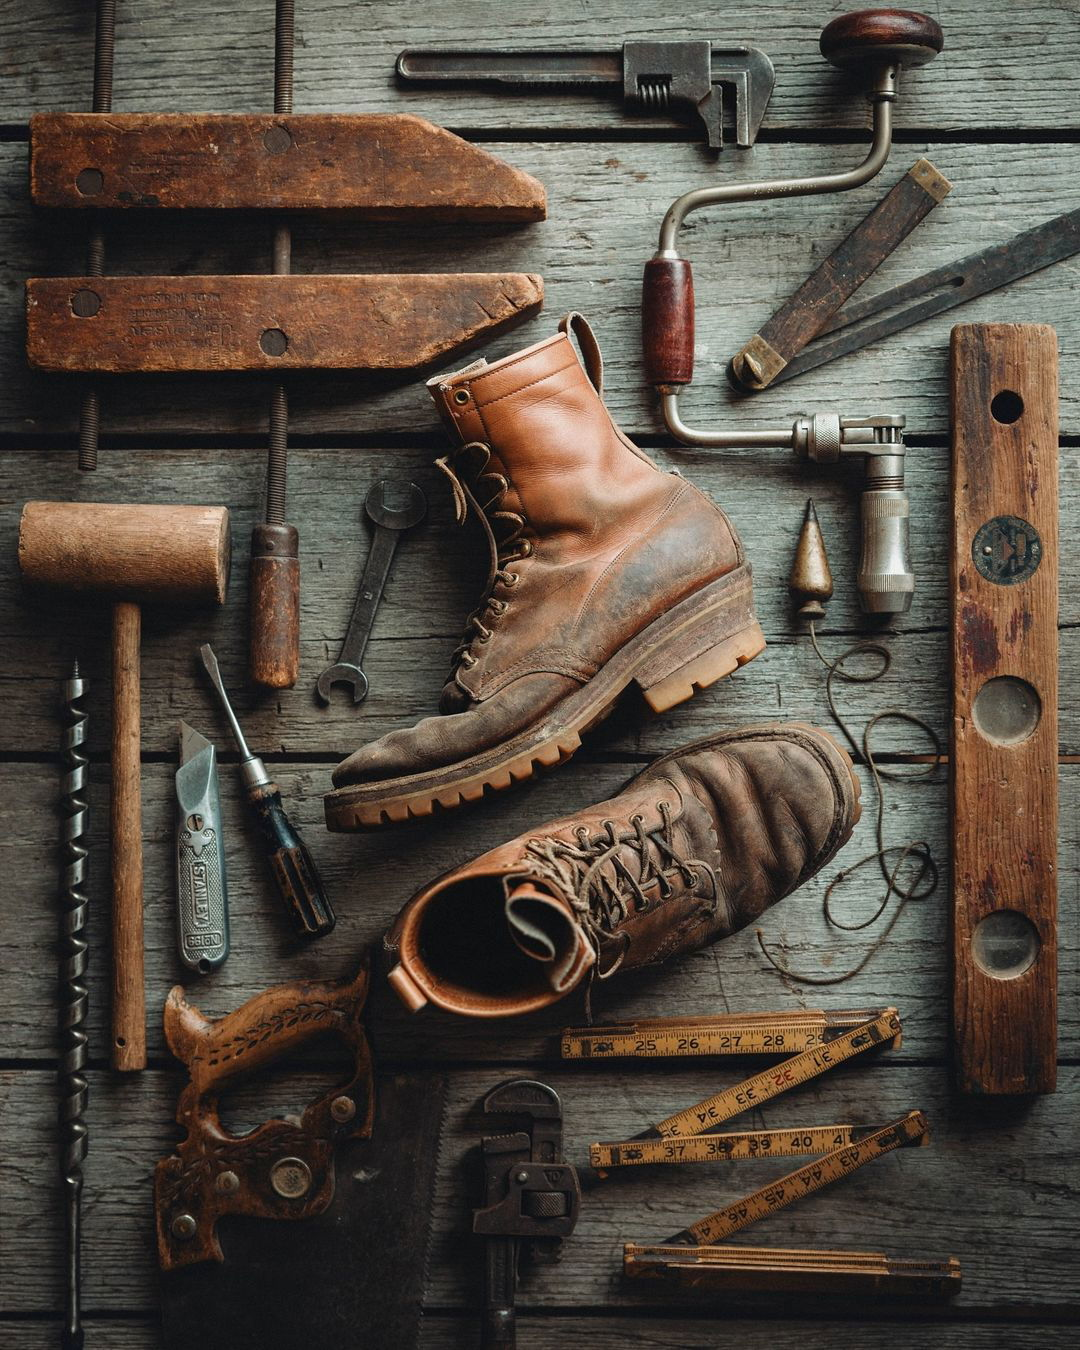 Photo by White's Boots in Spokane, Washington. May be an image of hand drill, hammer, axe, screwdriver, ruler, toecap shoes, boots, wrench and text.